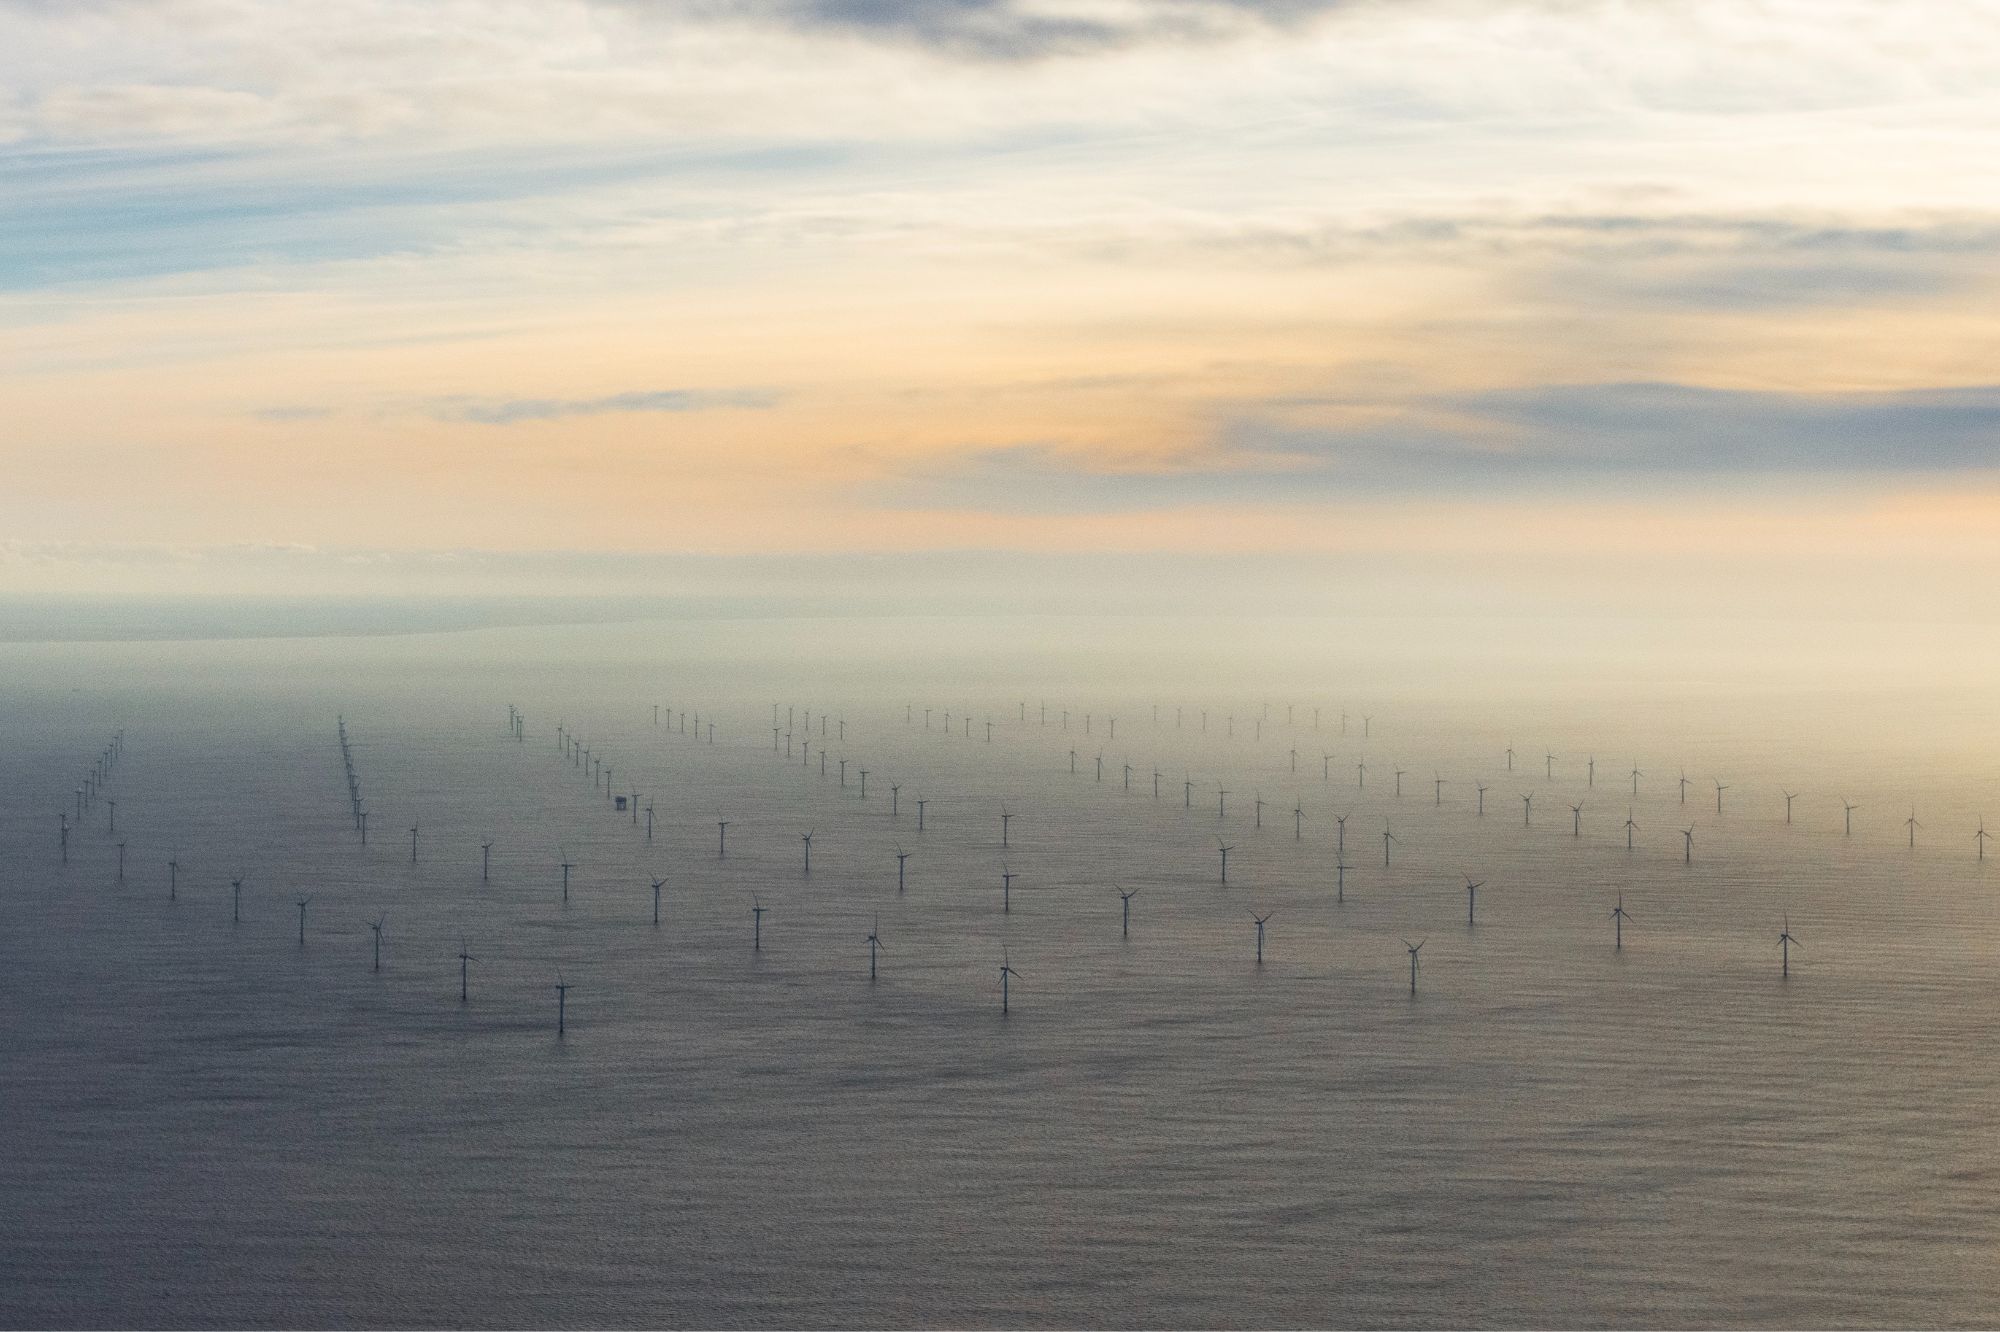 Above: Race Bank Offshore Wind Farm, 27km off the coast of Norfolk, United Kingdom. Photo by Nicholas Doherty on Unsplash. 